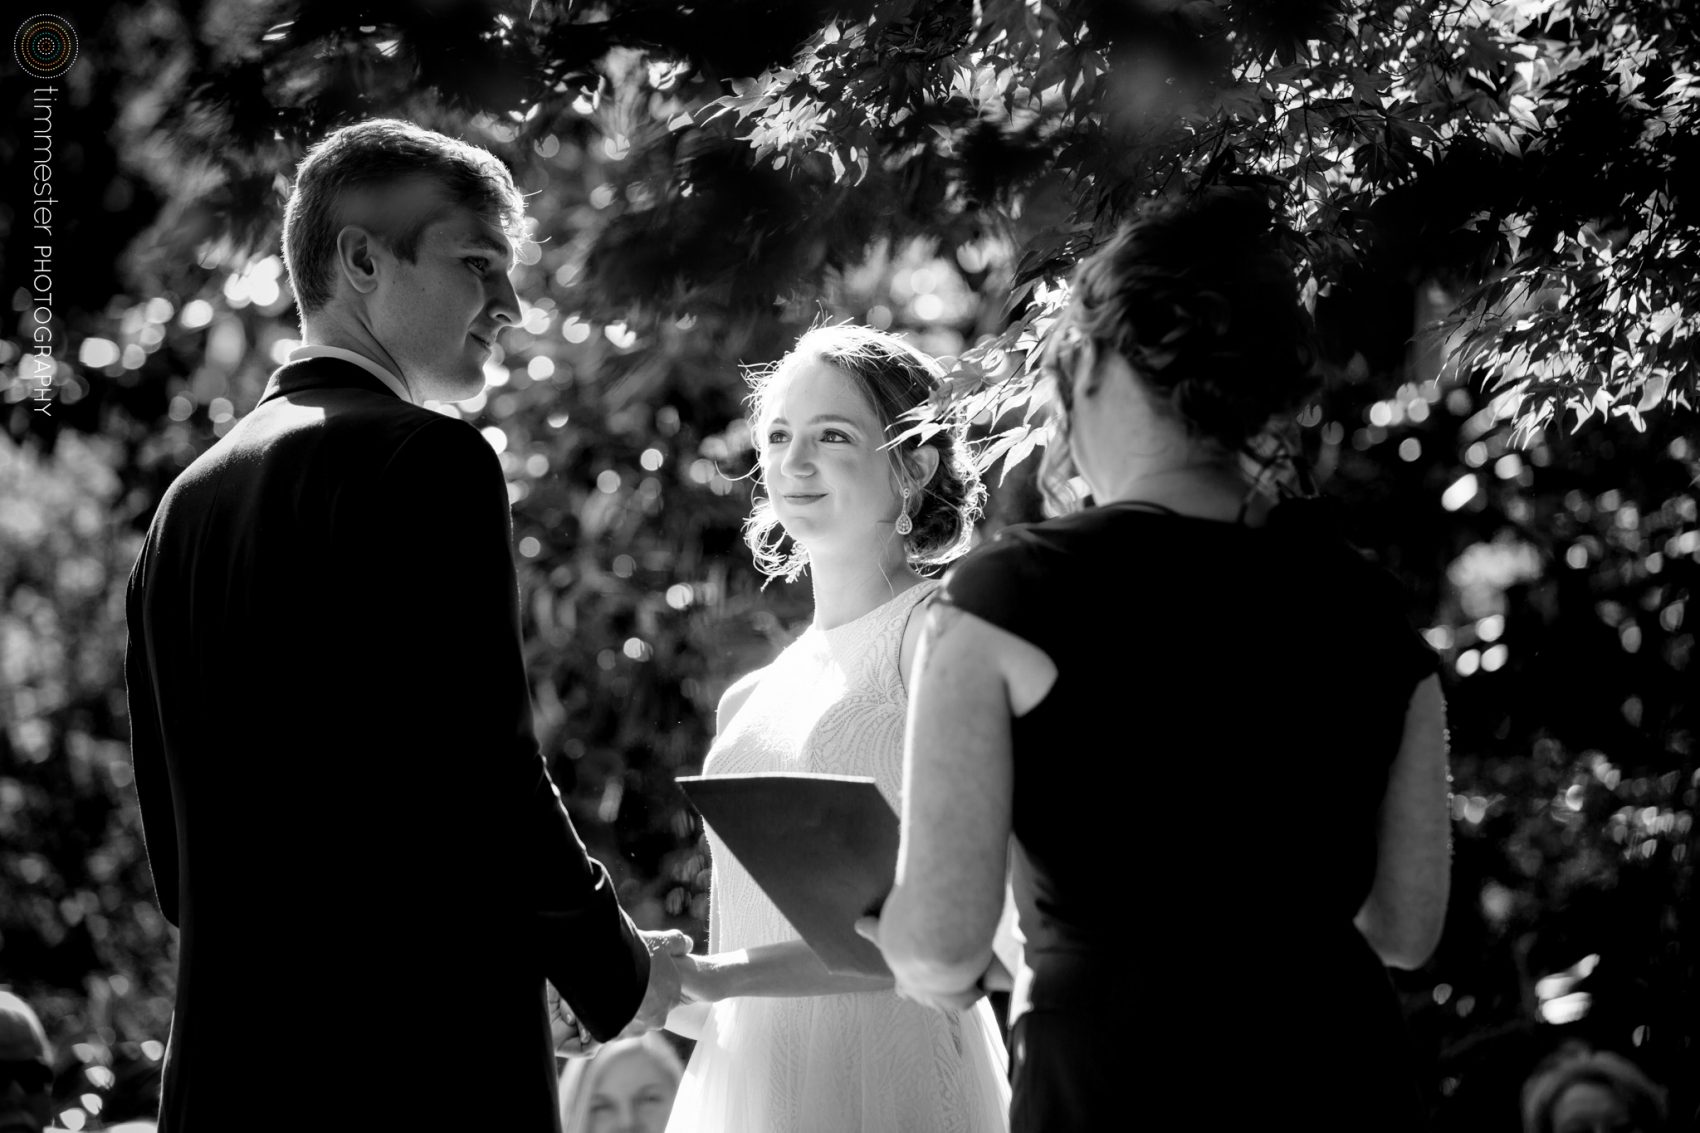 The wedding ceremony between Sarah & Jacob at their outdoor ceremony at Fred Fletcher Park, Raleigh, NC.